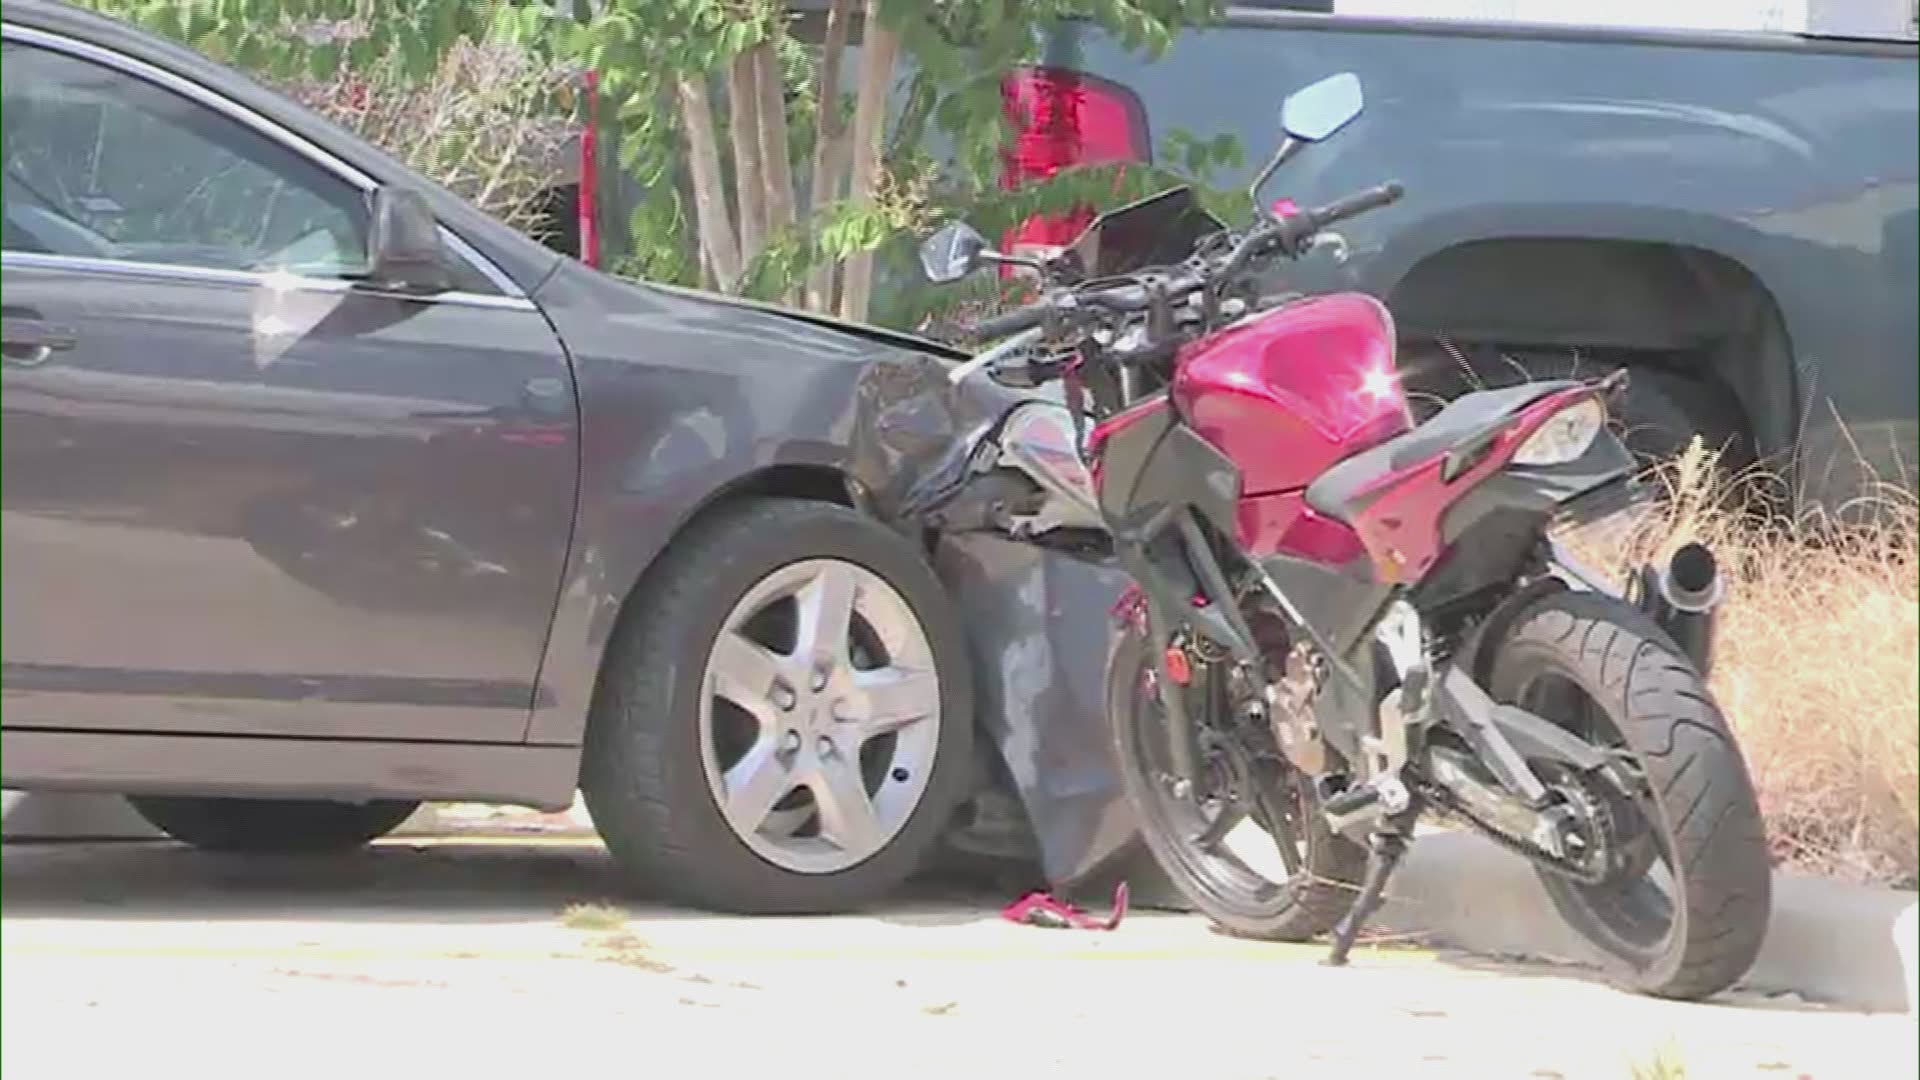 An 19-year-old was badly hurt when he crashed his friend's motorcycle into a parked car. The feeder road of Tomball Parkway near Spring Cypress was temporarily shut down so Life Flight could land.